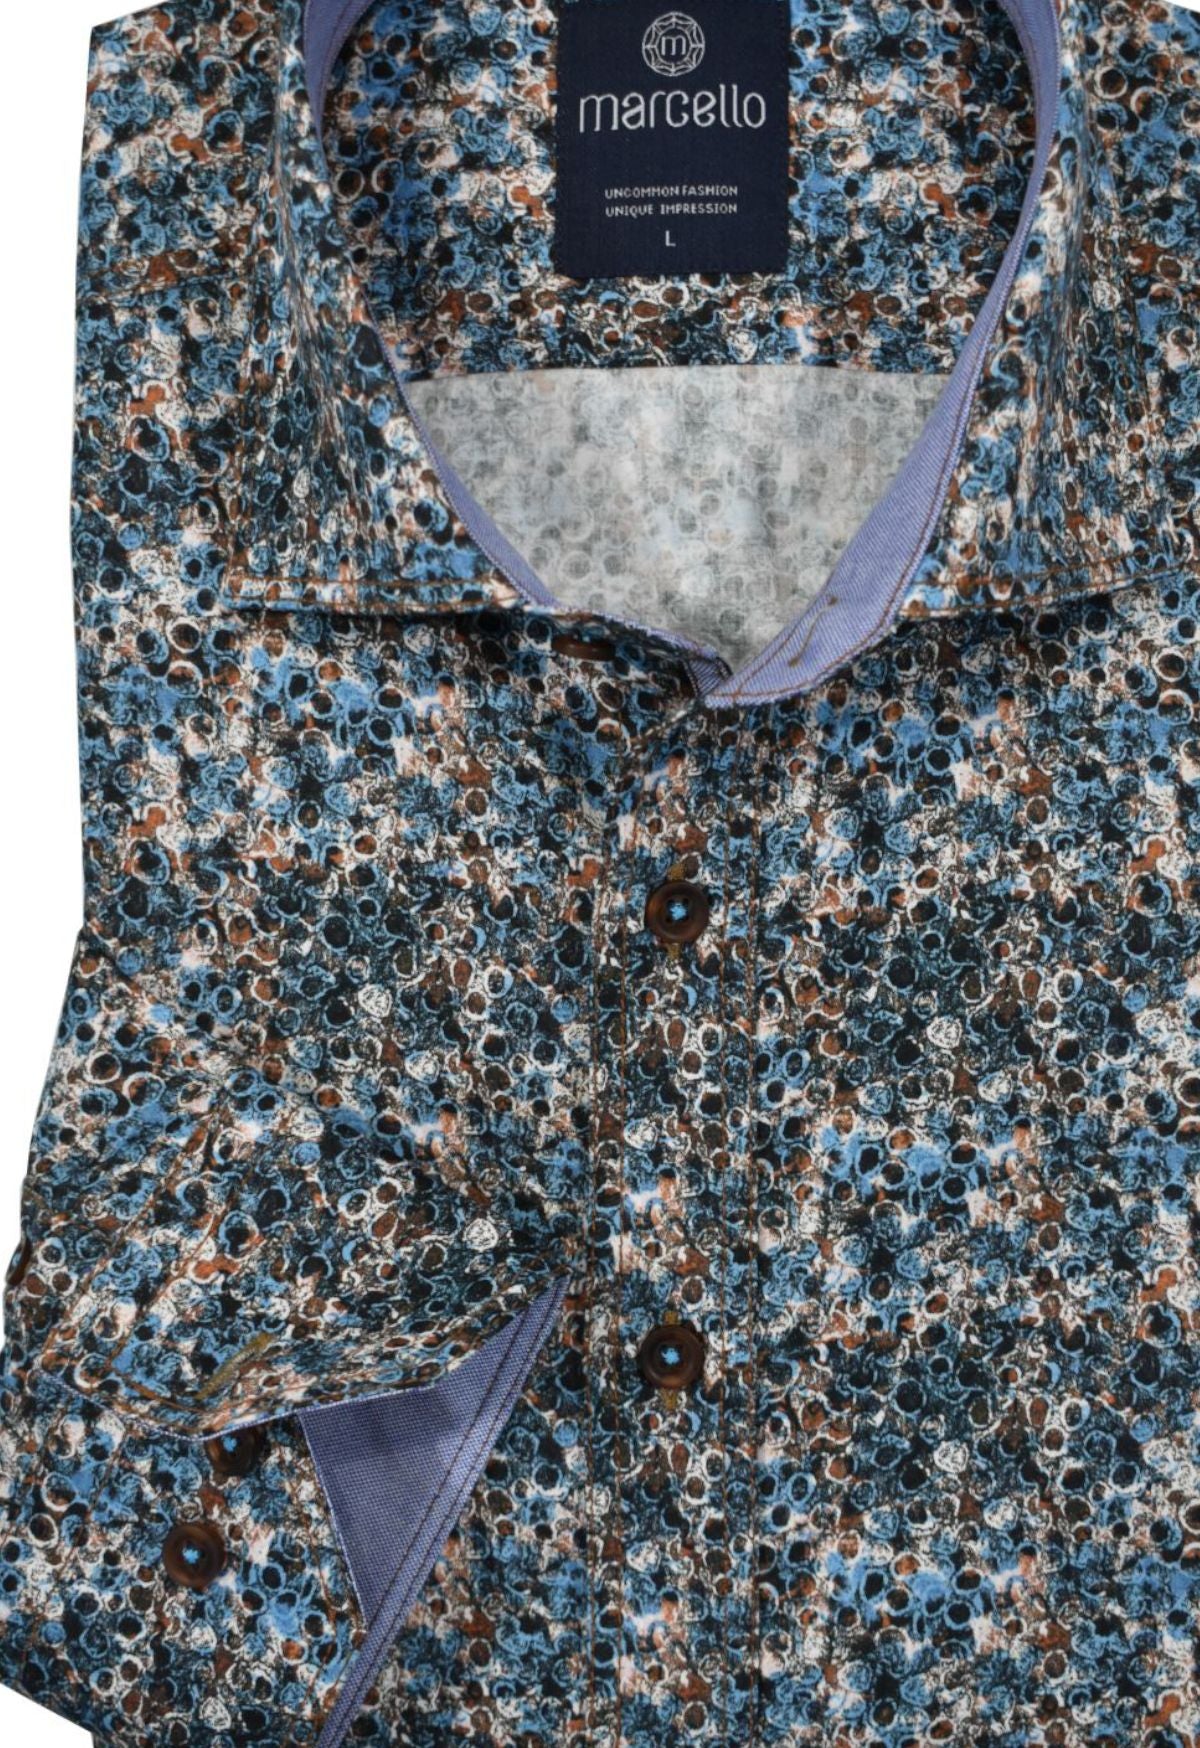 Make a statement in this fashionable mixed pattern design with Earth tones and a touch of teal for an eye-catching finish. Perfect for a casual look with jeans, or dress it up with tailored trousers for a sophisticated ensemble. Uniquely crafted with double track stitching, premium fabric and a classic shaped fit. By Marcello